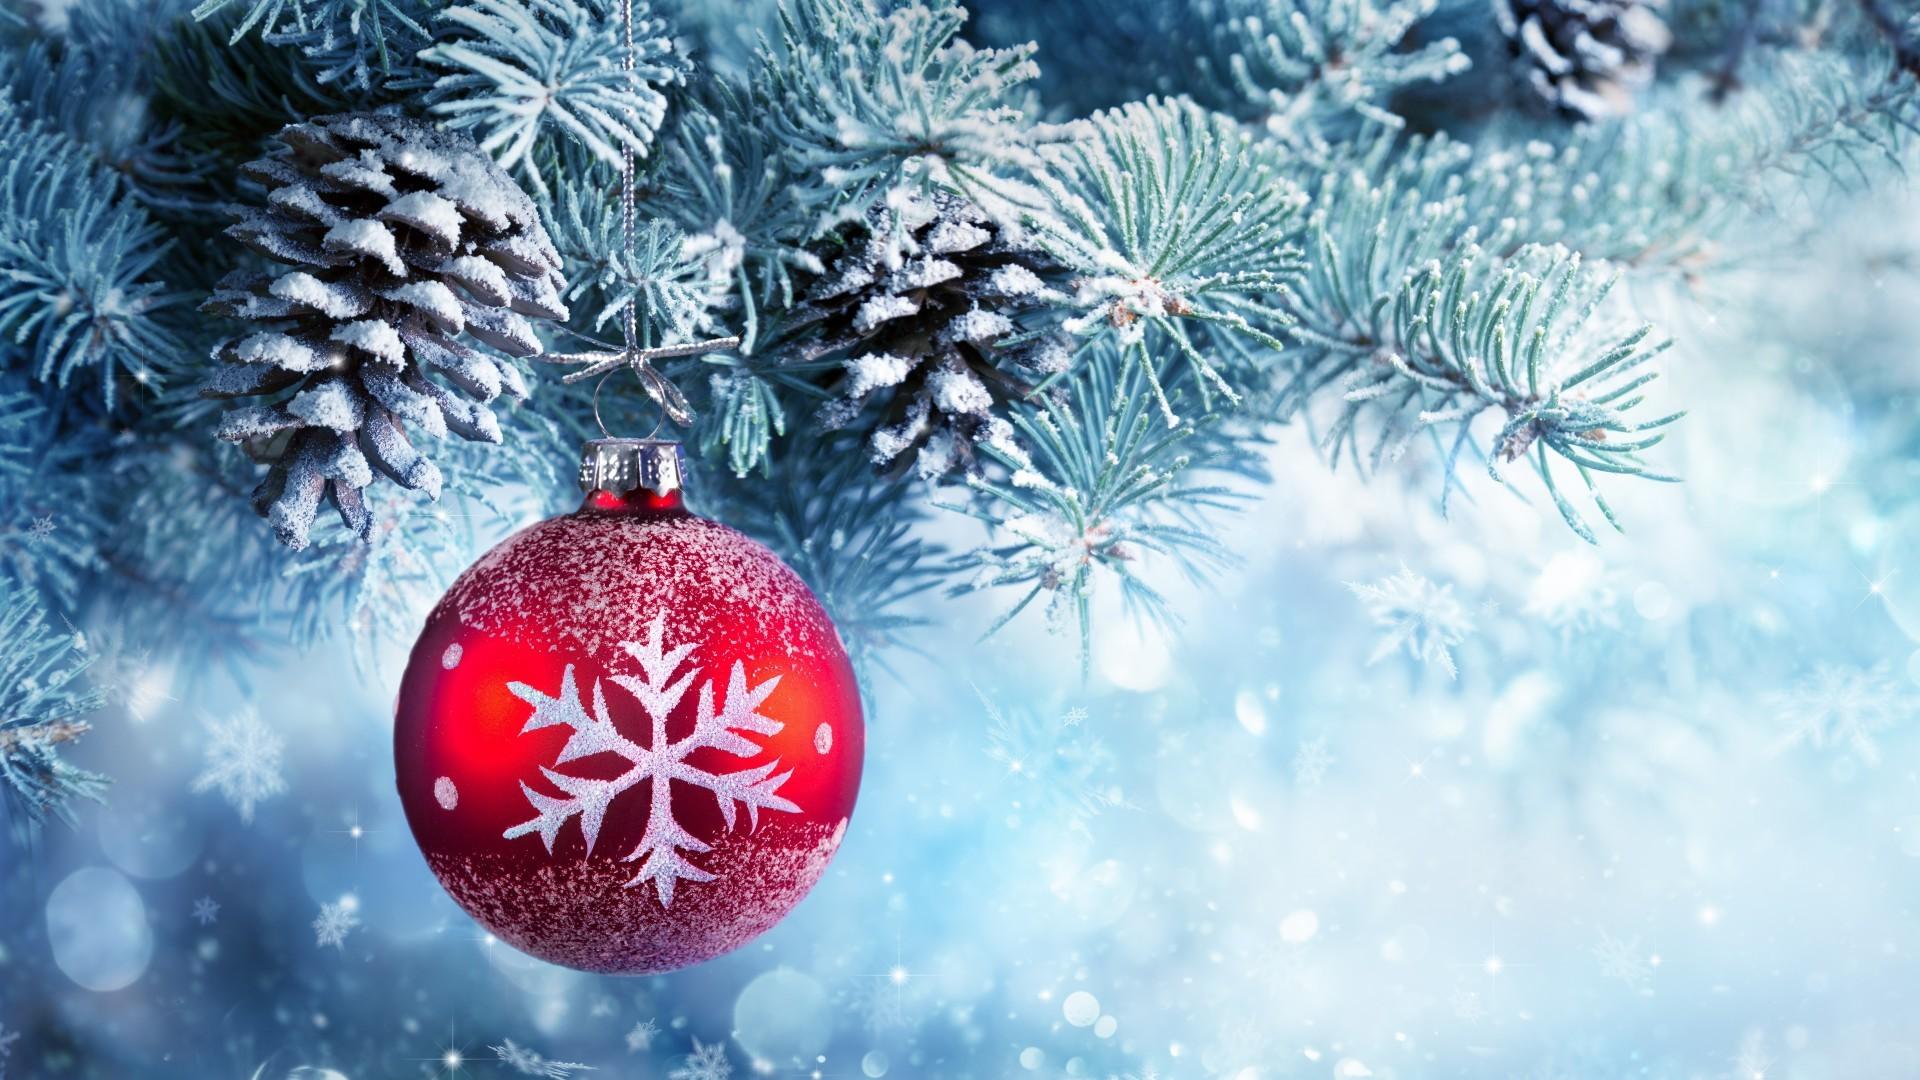 Winter Christmas HD Wallpapers - Wallpaper Cave